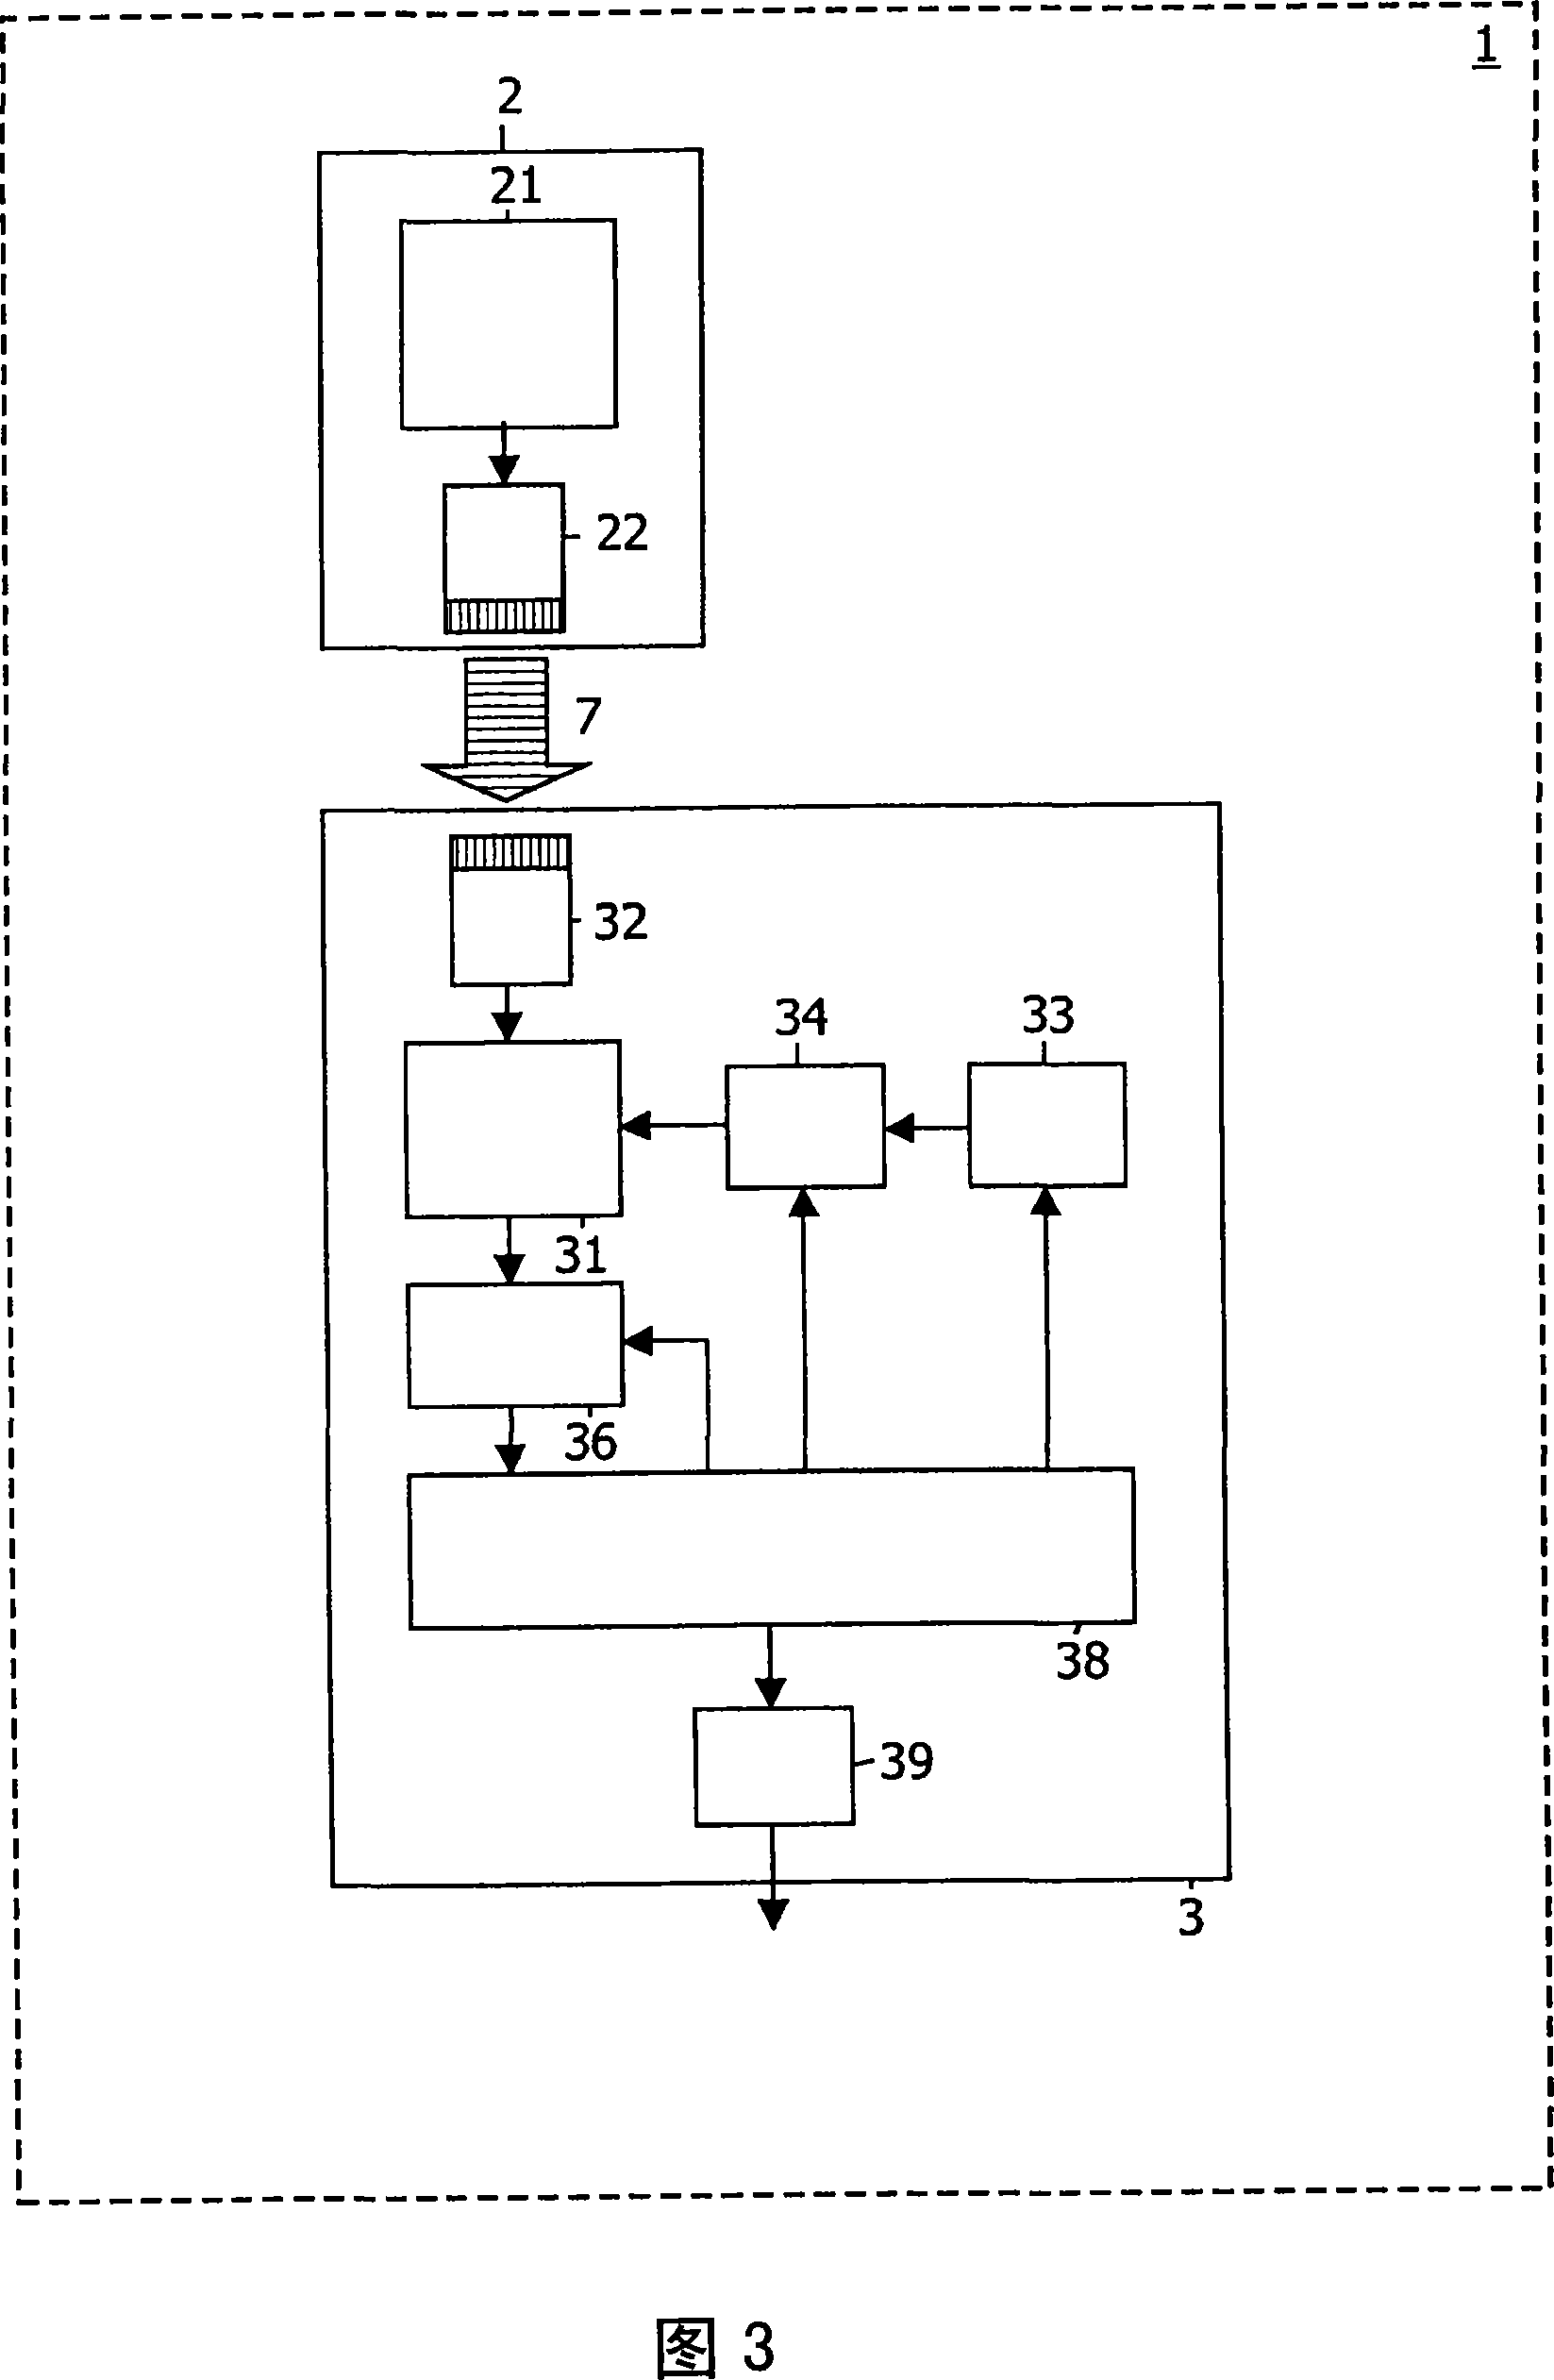 System comprising a generating device and a comparing device